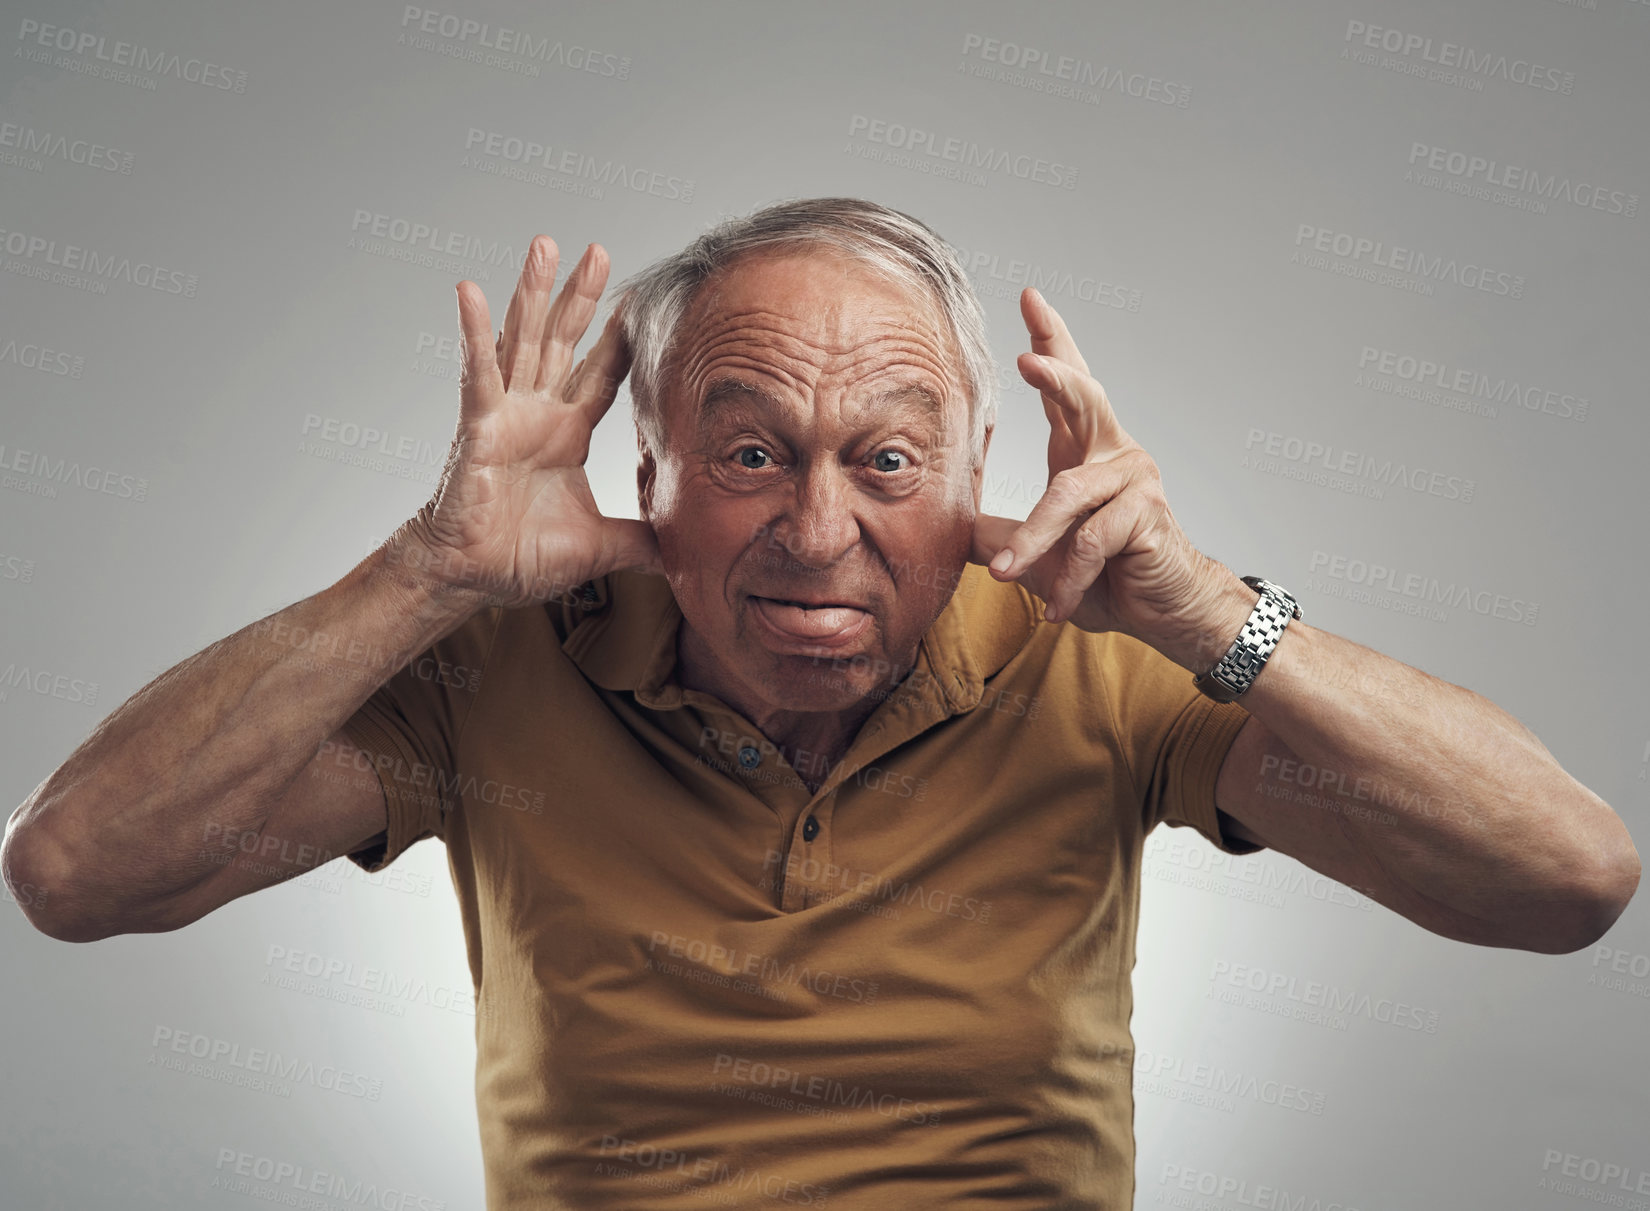 Buy stock photo Studio shot of an elderly man making a funny face against a grey background